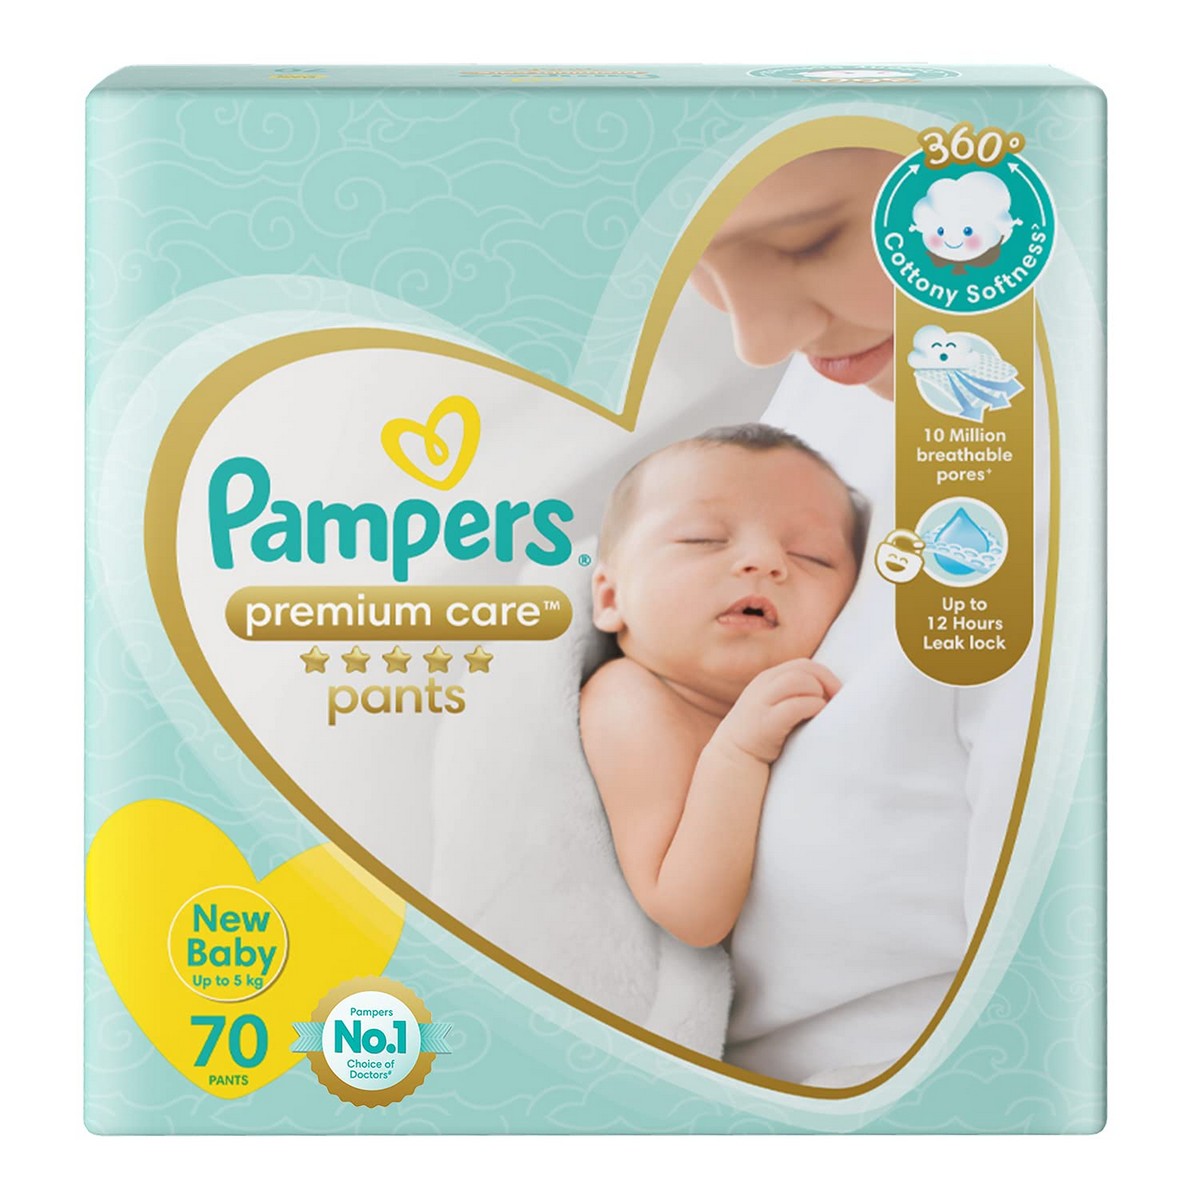 Pampers Baby Pants Size New Born Up to 5KG, (60 Counts): Buy